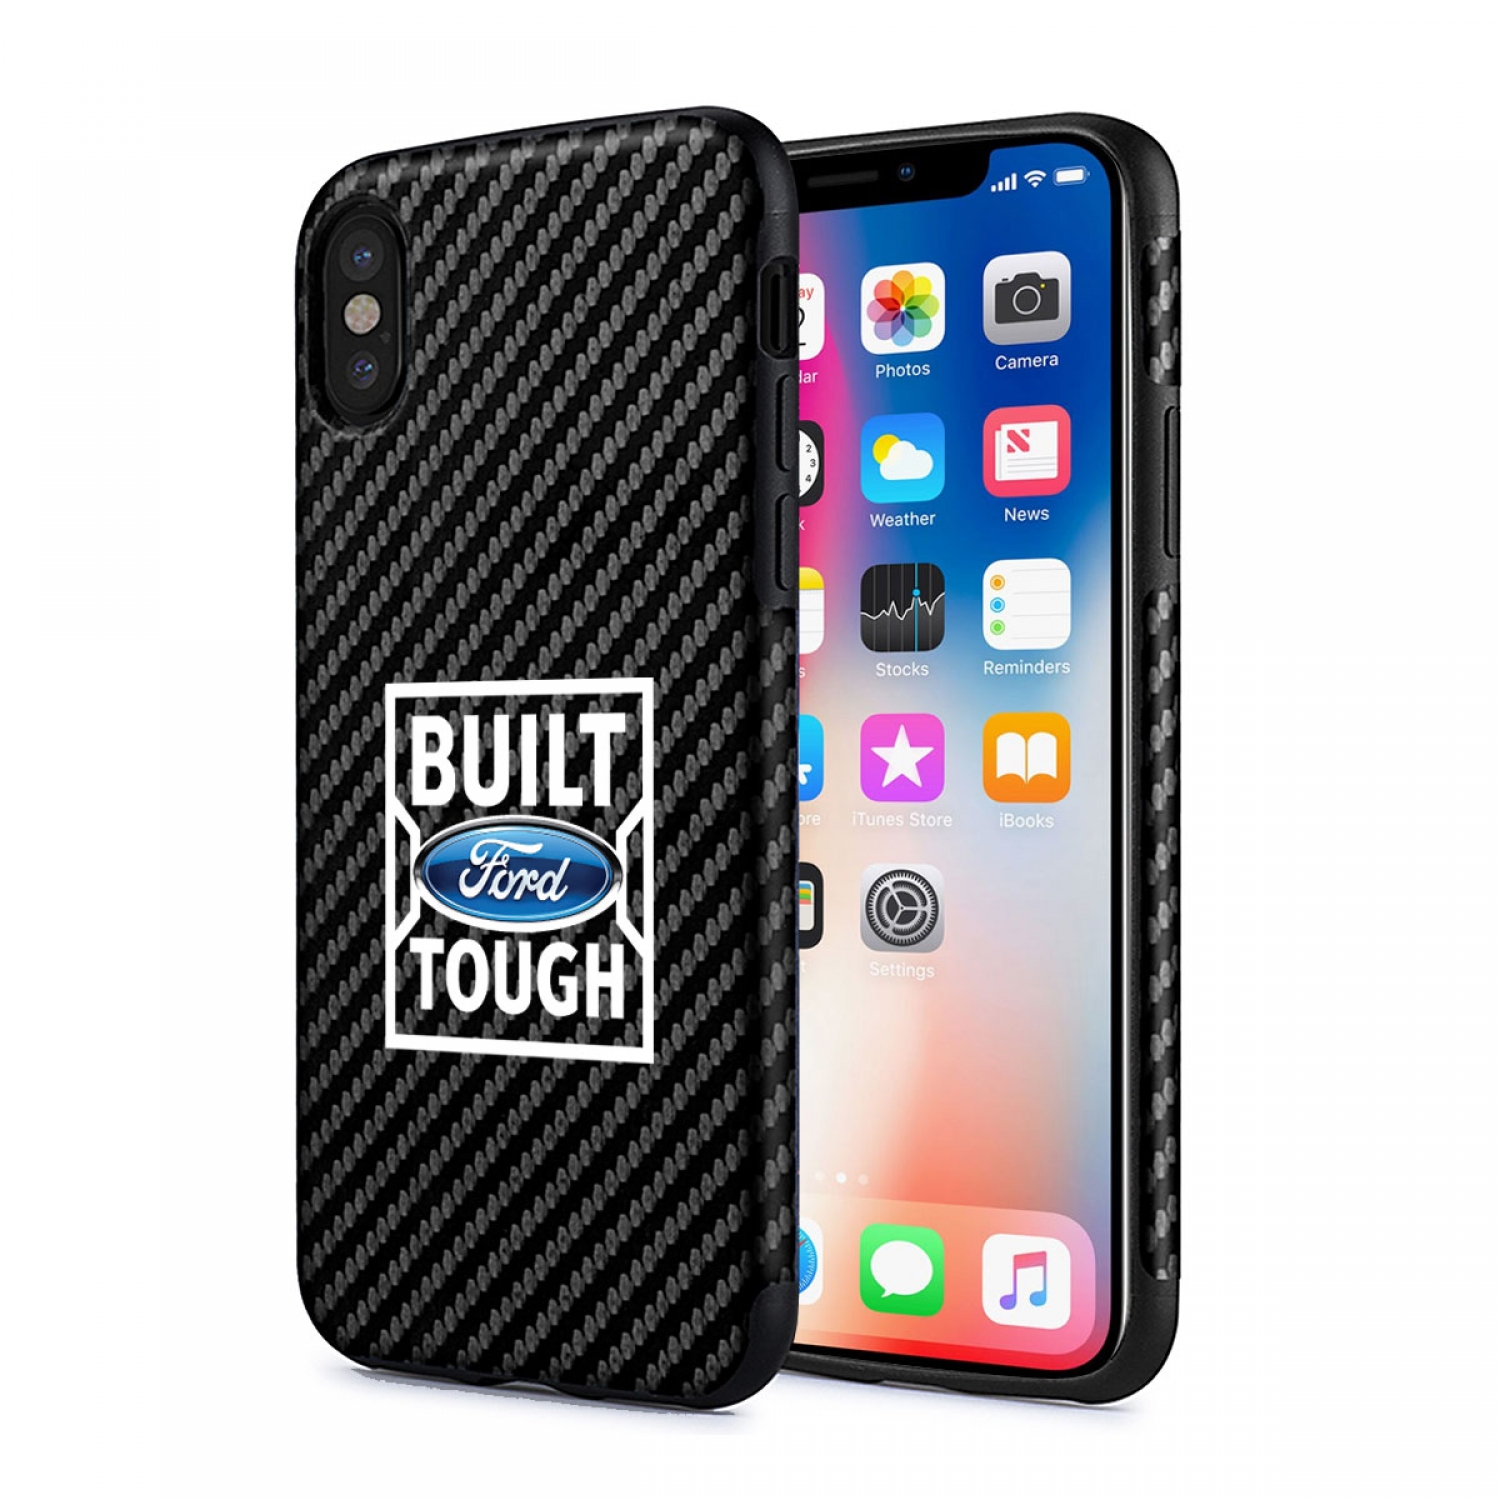 Ford Built Ford Tough iPhone X Black Carbon Fiber Texture Leather TPU Shockproof Cell Phone Case